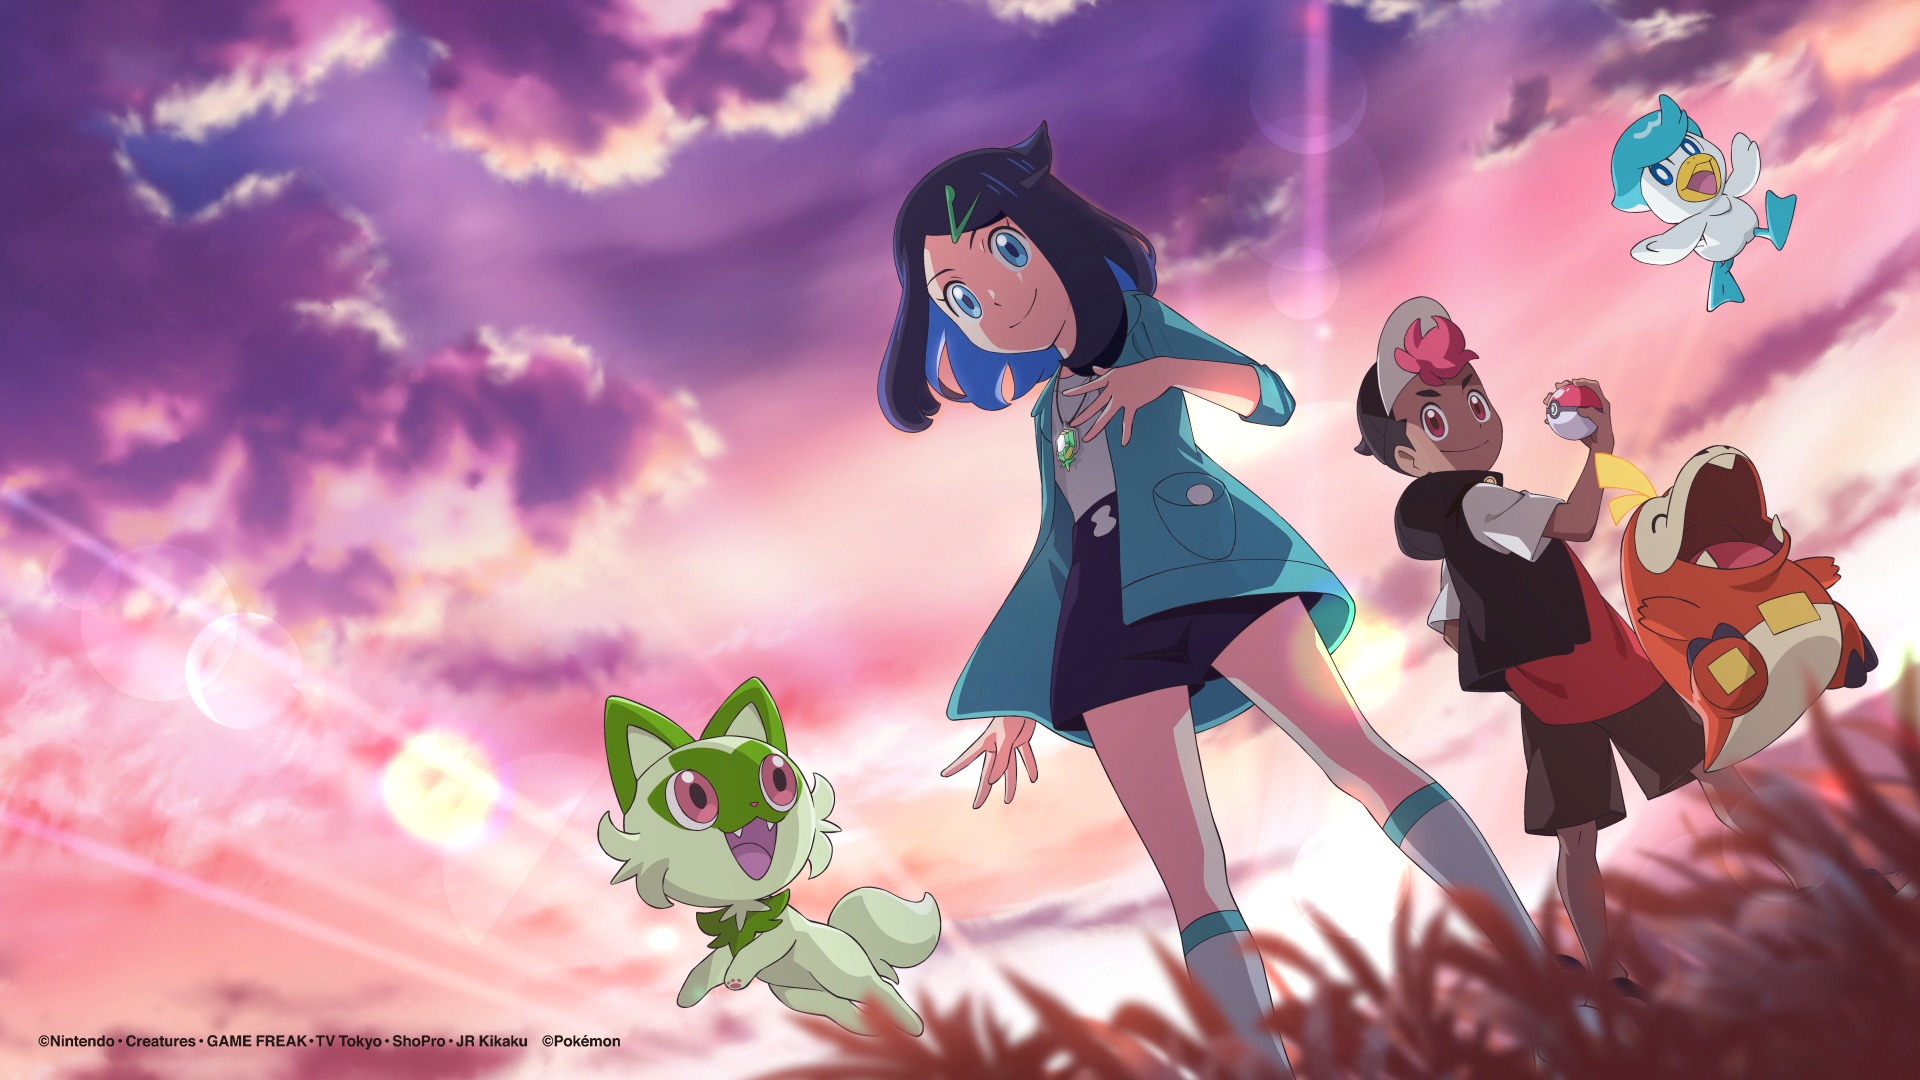 Crunchyroll - Captain Pikachu Helps Steer the New Protagonists in Upcoming Pokémon  TV Anime